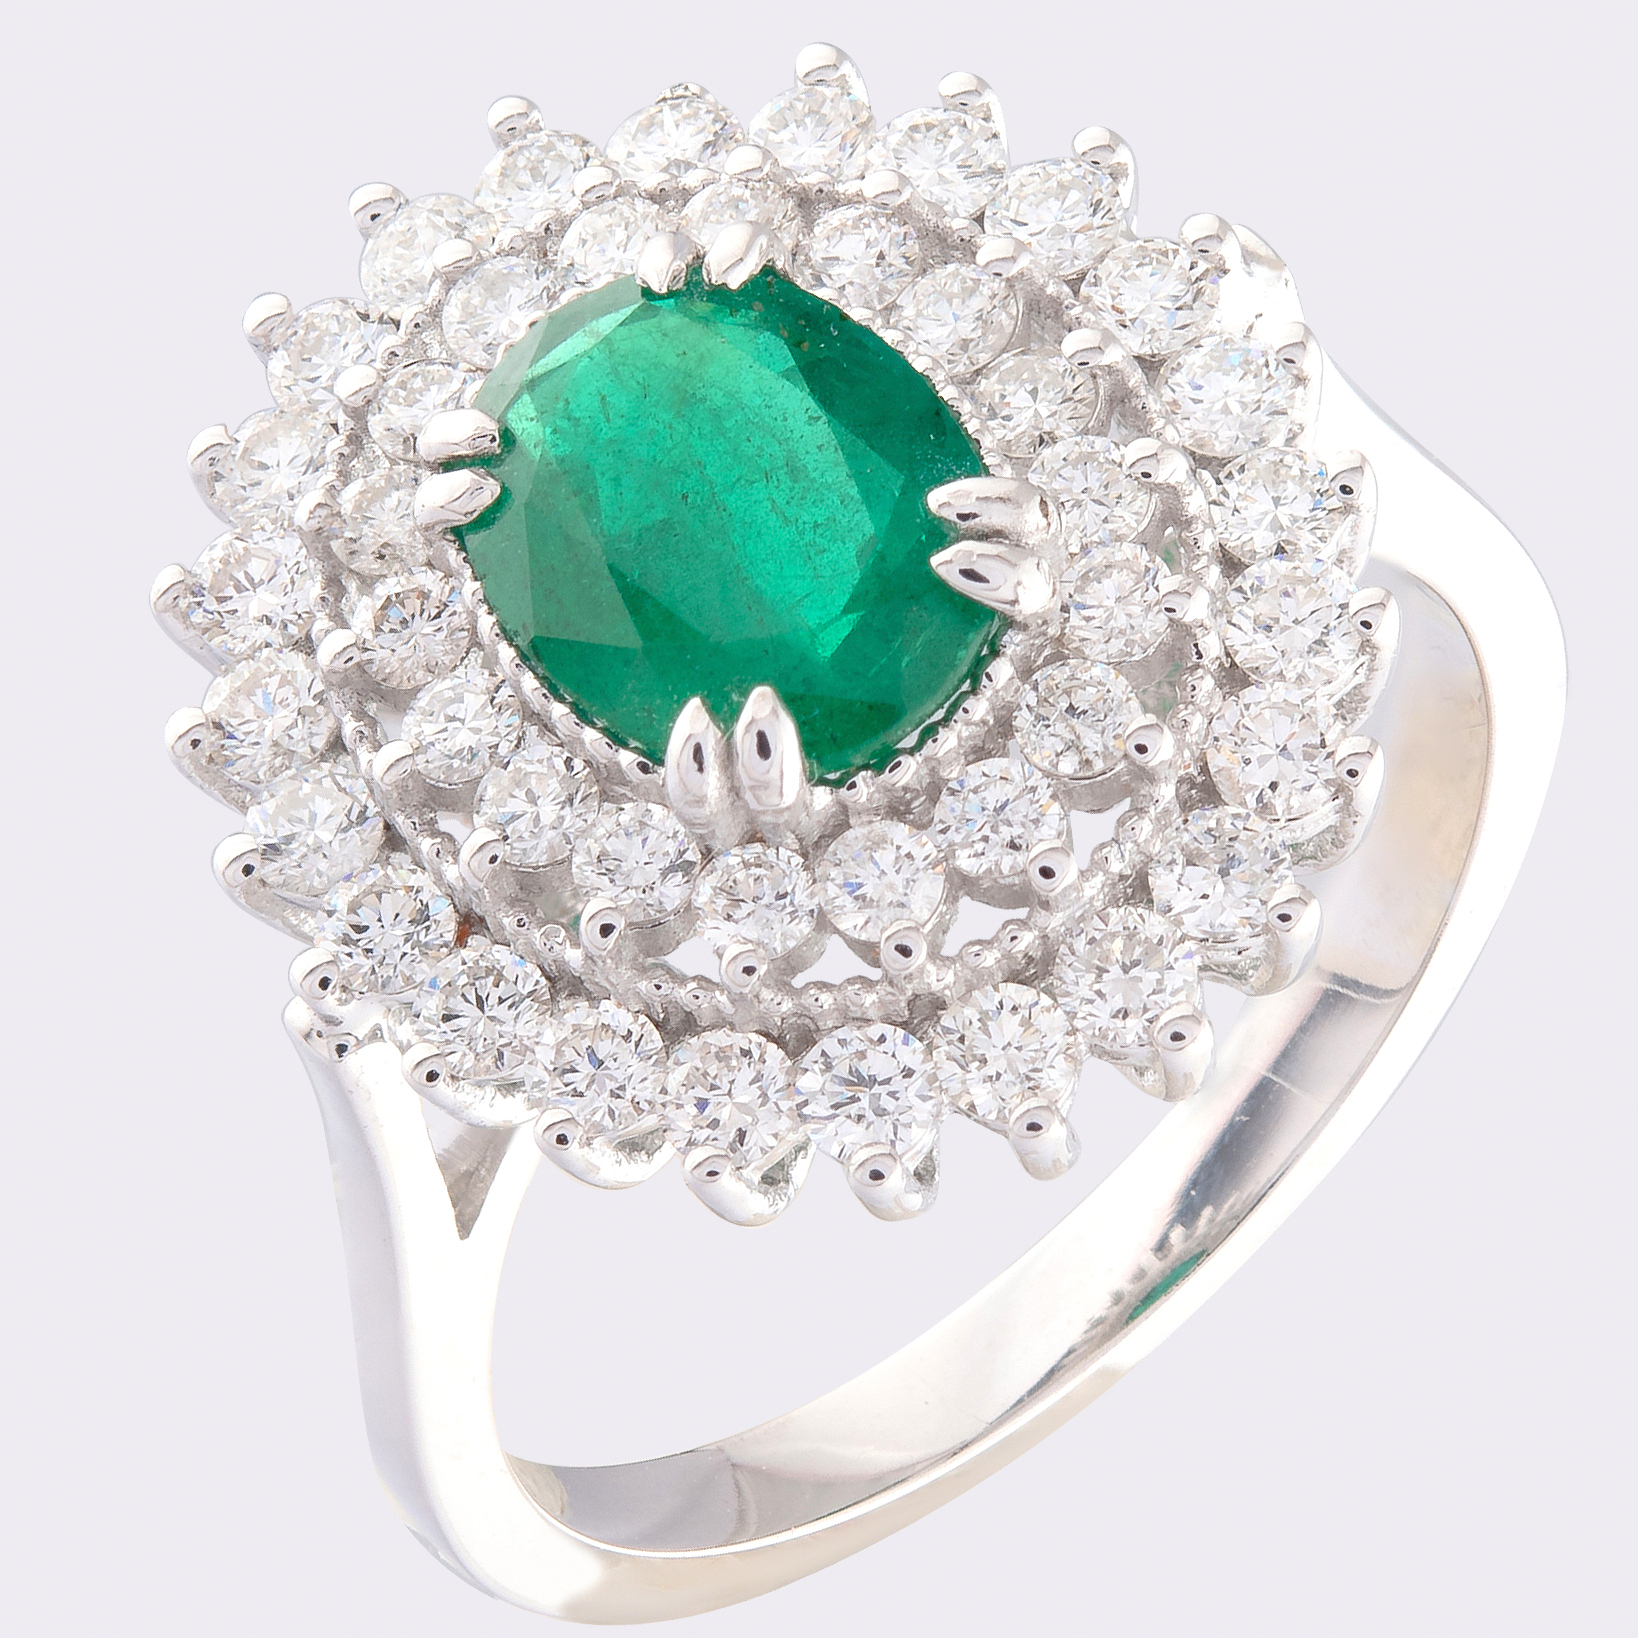 Certificated 14K White Gold Diamond & Emerald Ring / Total 2.1 ct